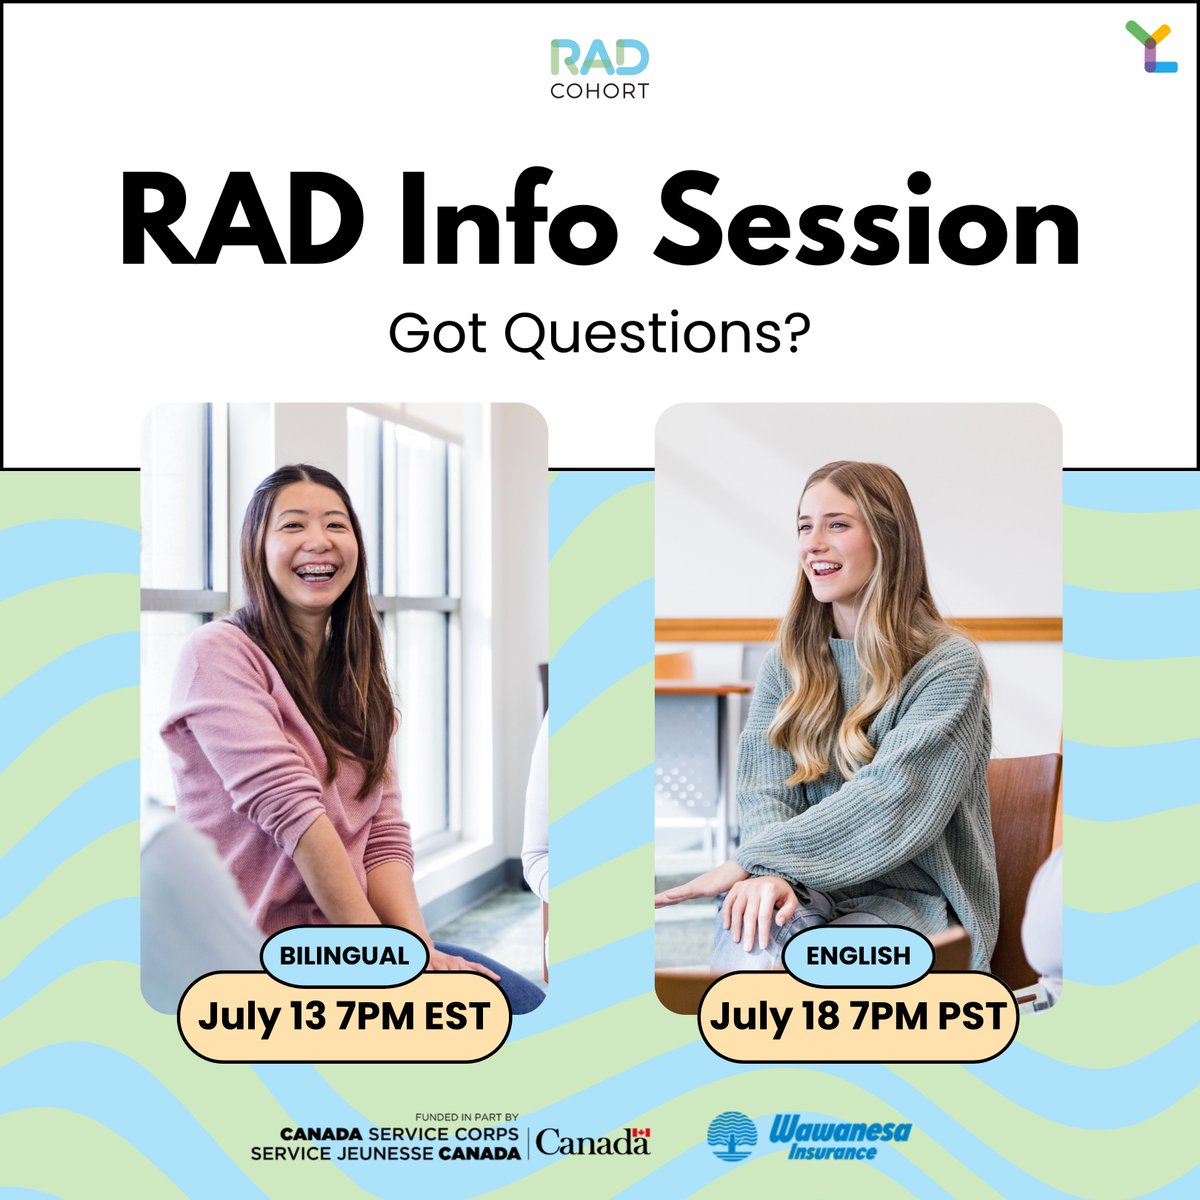 Our first RAD Cohort Info Session is tonight🌎 Register Here ➡ tinyurl.com/radinfosession Not sure if you qualify? Want to ask YCL staff a question? Join us for a bilingual info session tonight at 7PM EST to get all your questions answered and apply to RAD with confidence! 🚀🌍